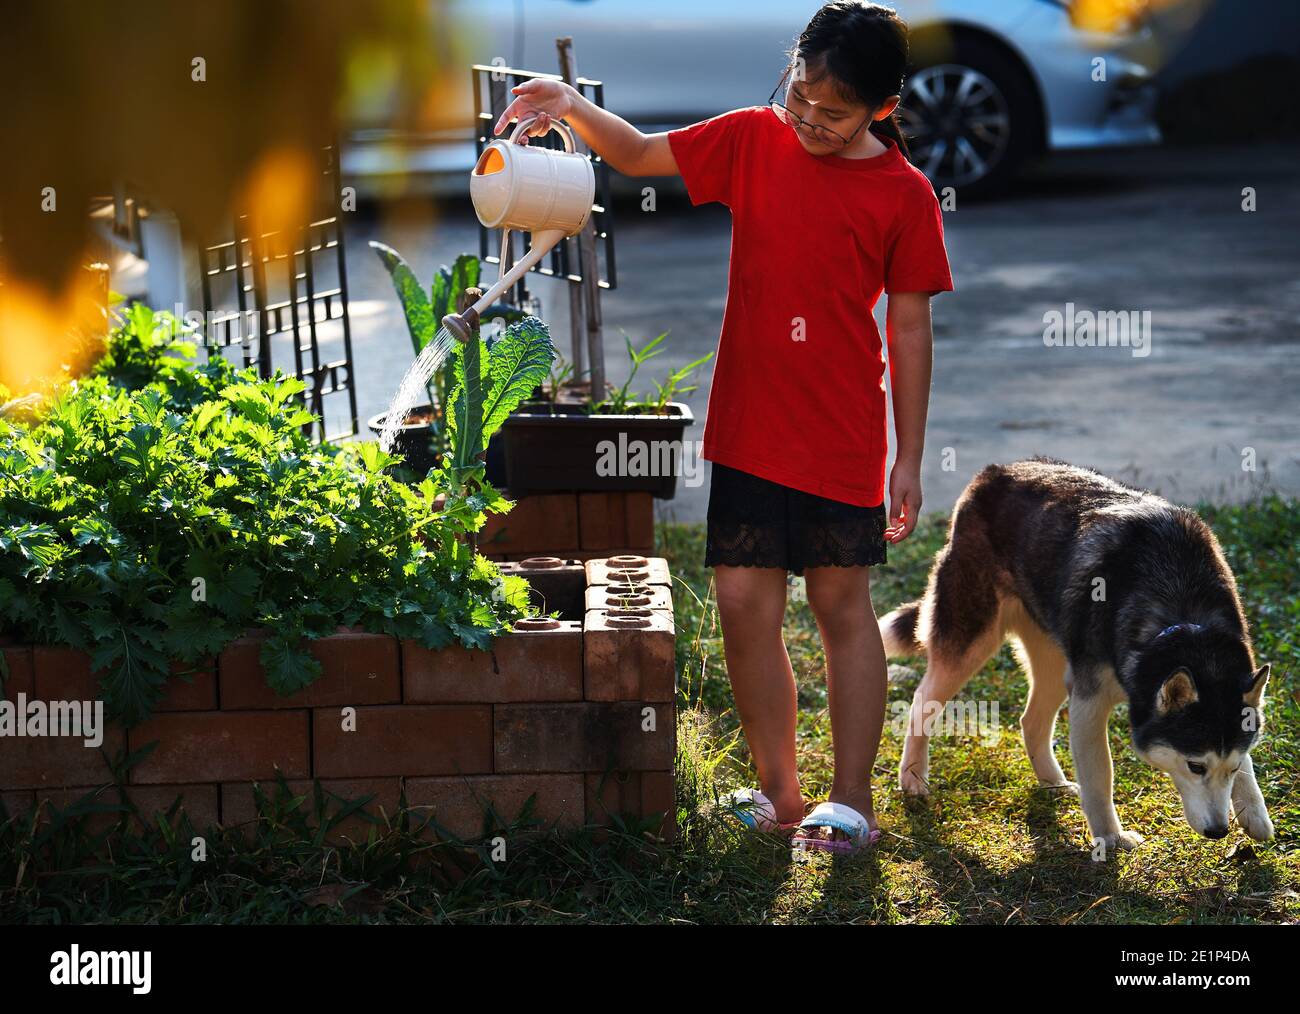 A girl is watering her homegrown vegetables in the yard Stock Photo